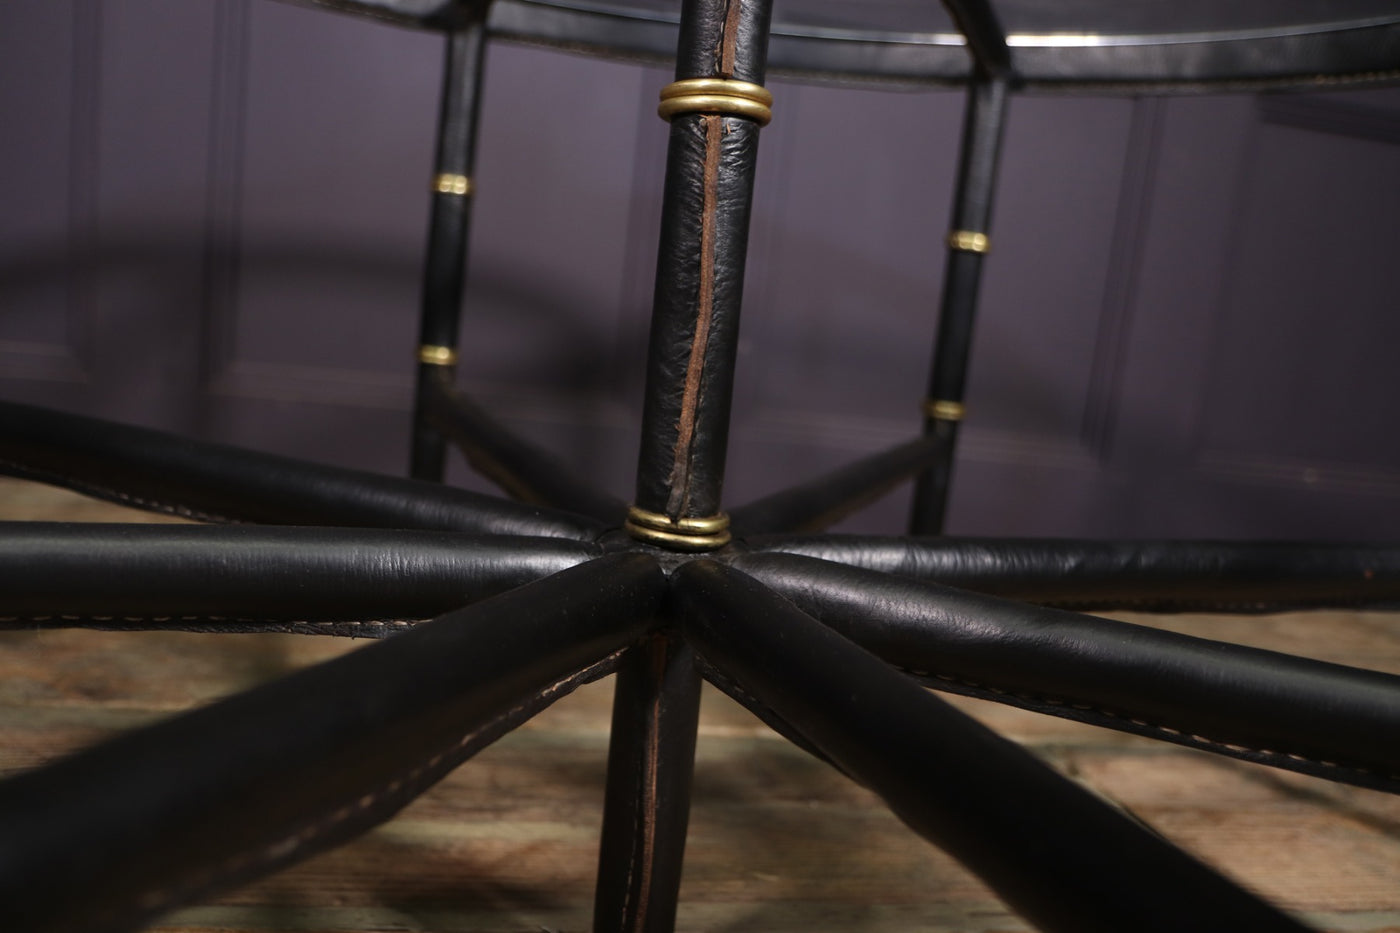 Stitched Leather and Brass Table by Jacques Adnet centre